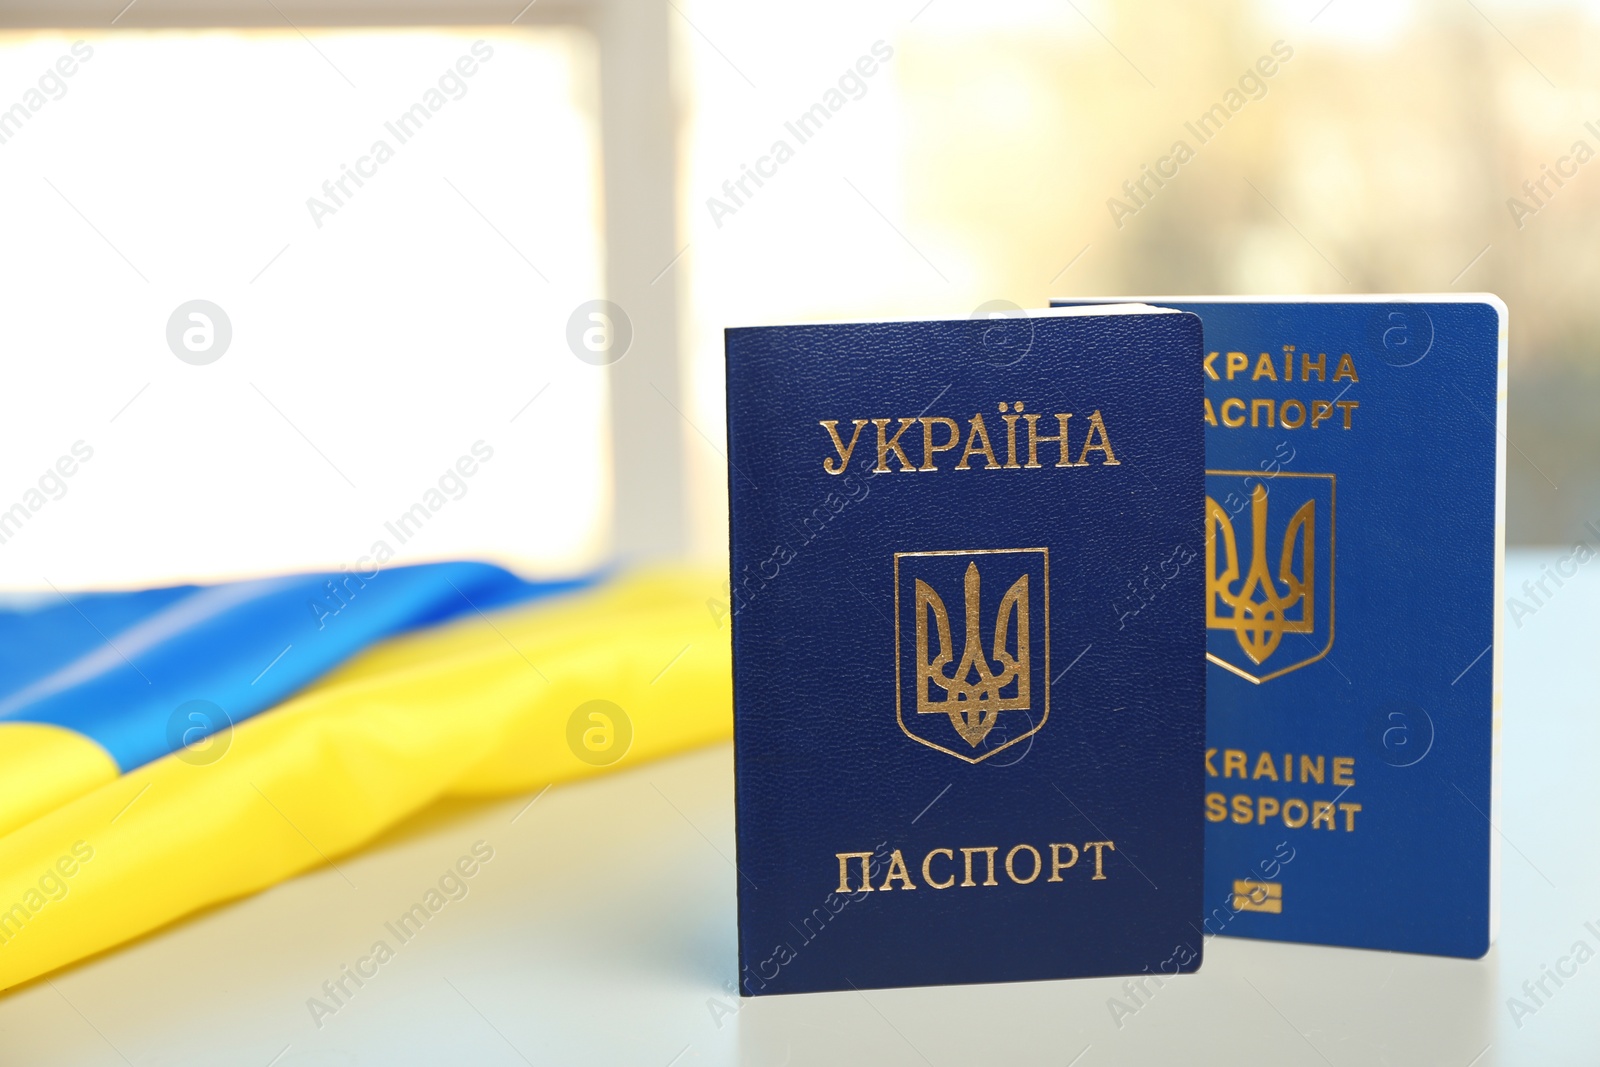 Photo of Ukrainian passports and national flag on table against blurred background, space for text. International relationships